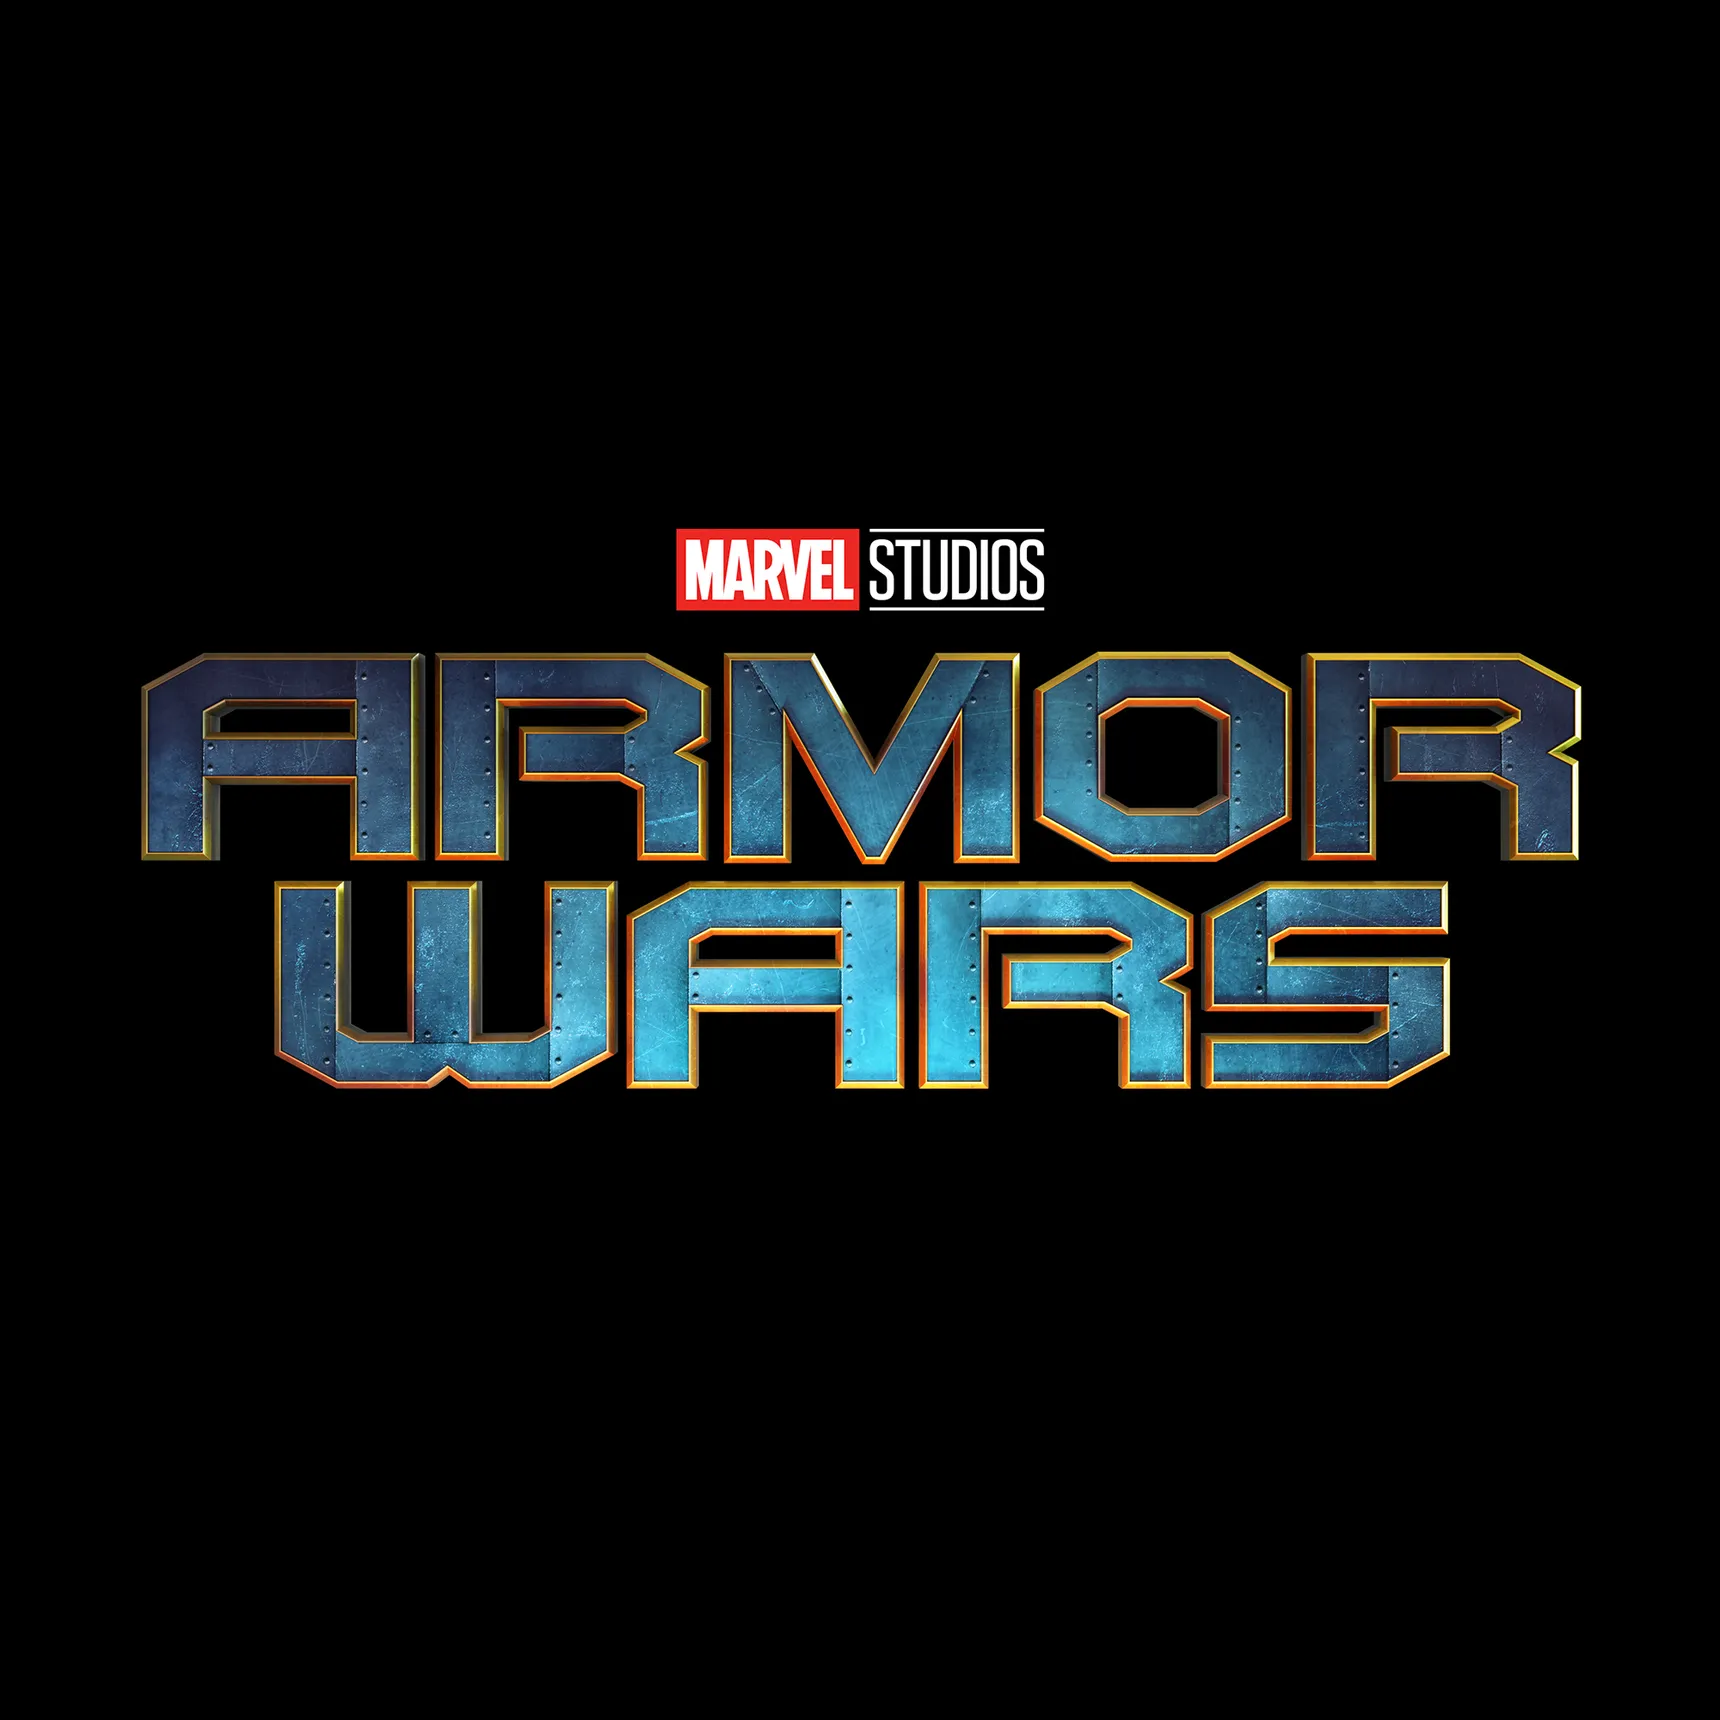 ANNOUNCED, BUT NO RELEASE DATE
ARMOR WARS